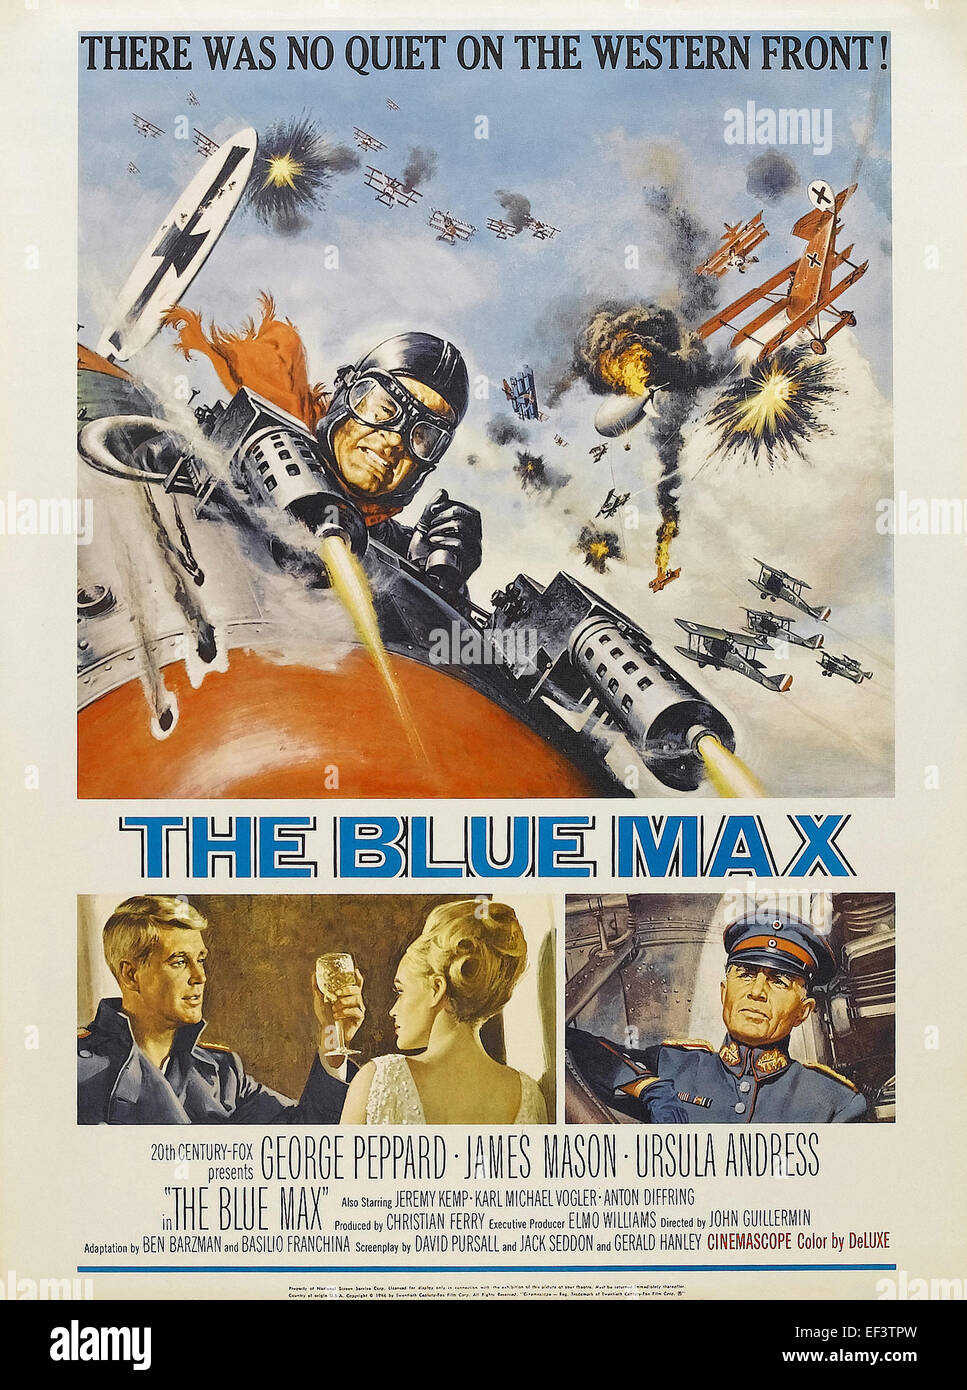 The Blue Max - Movie Poster Stock Photo